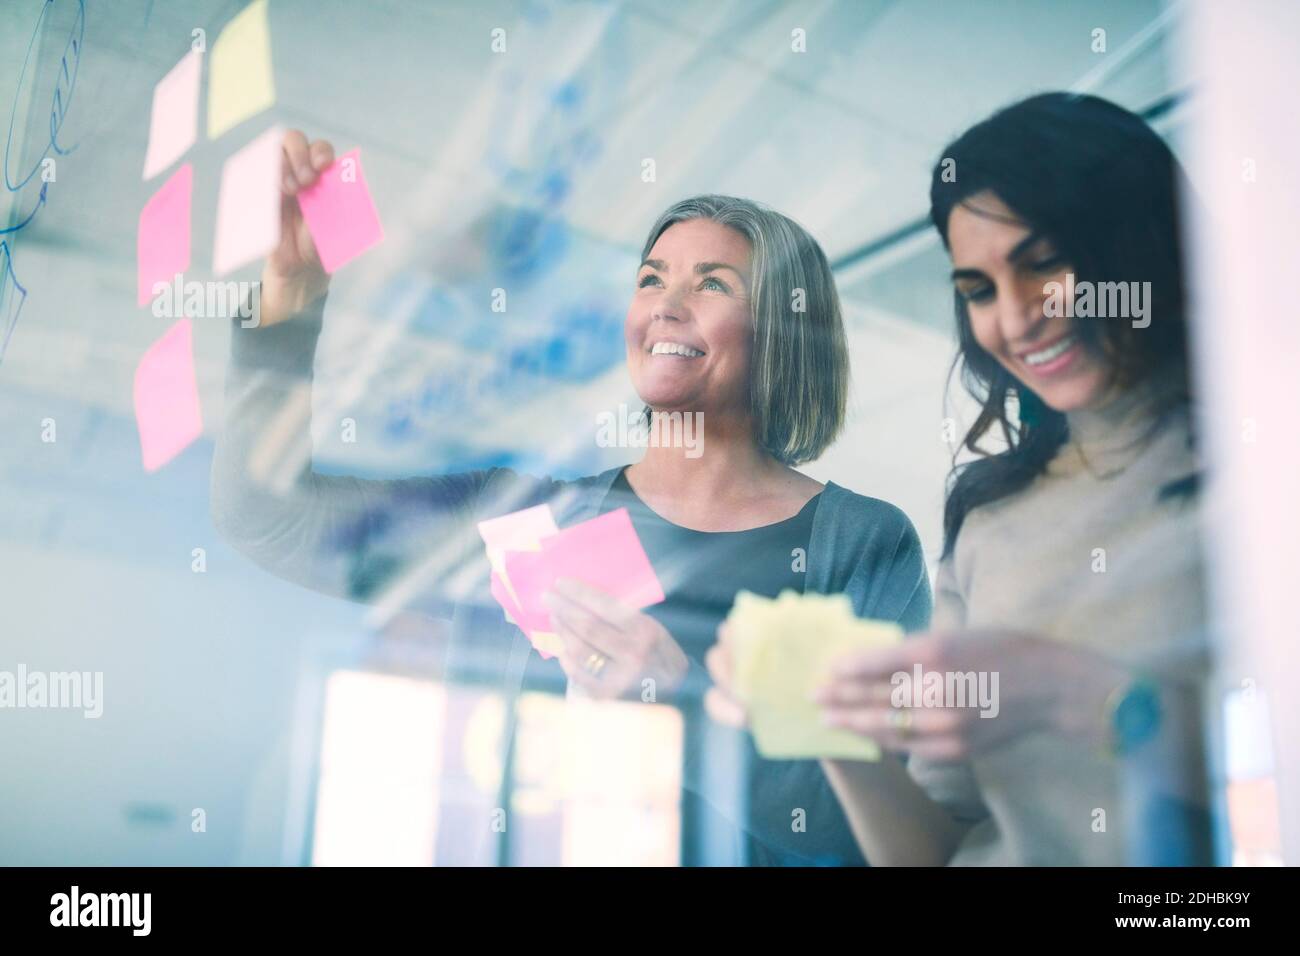 Low angle view of business professionals smiling while sticking adhesive notes on glass in office Stock Photo